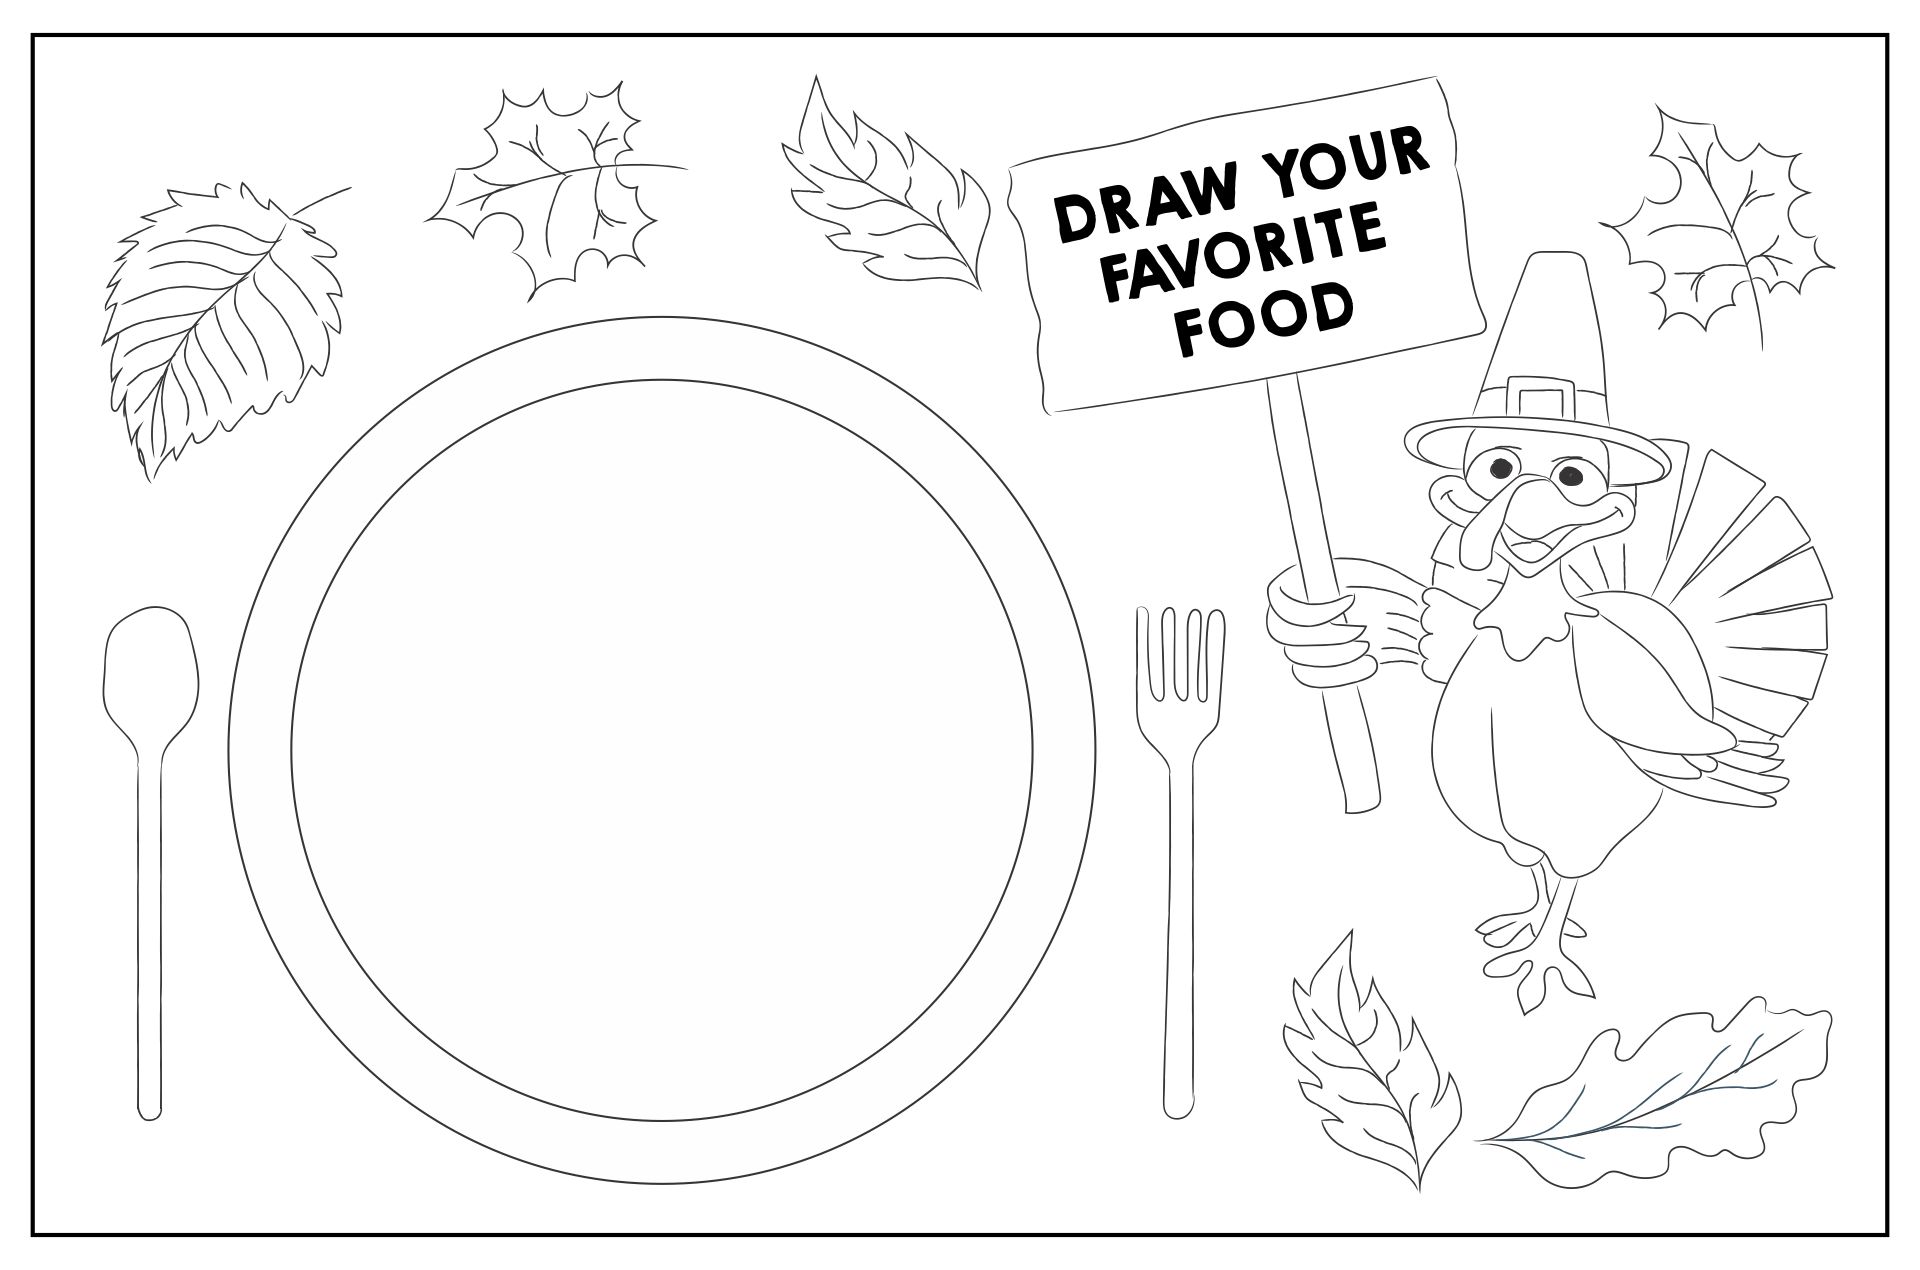 Thanksgiving Placemats To Color - 10 Free PDF Printables | Printablee